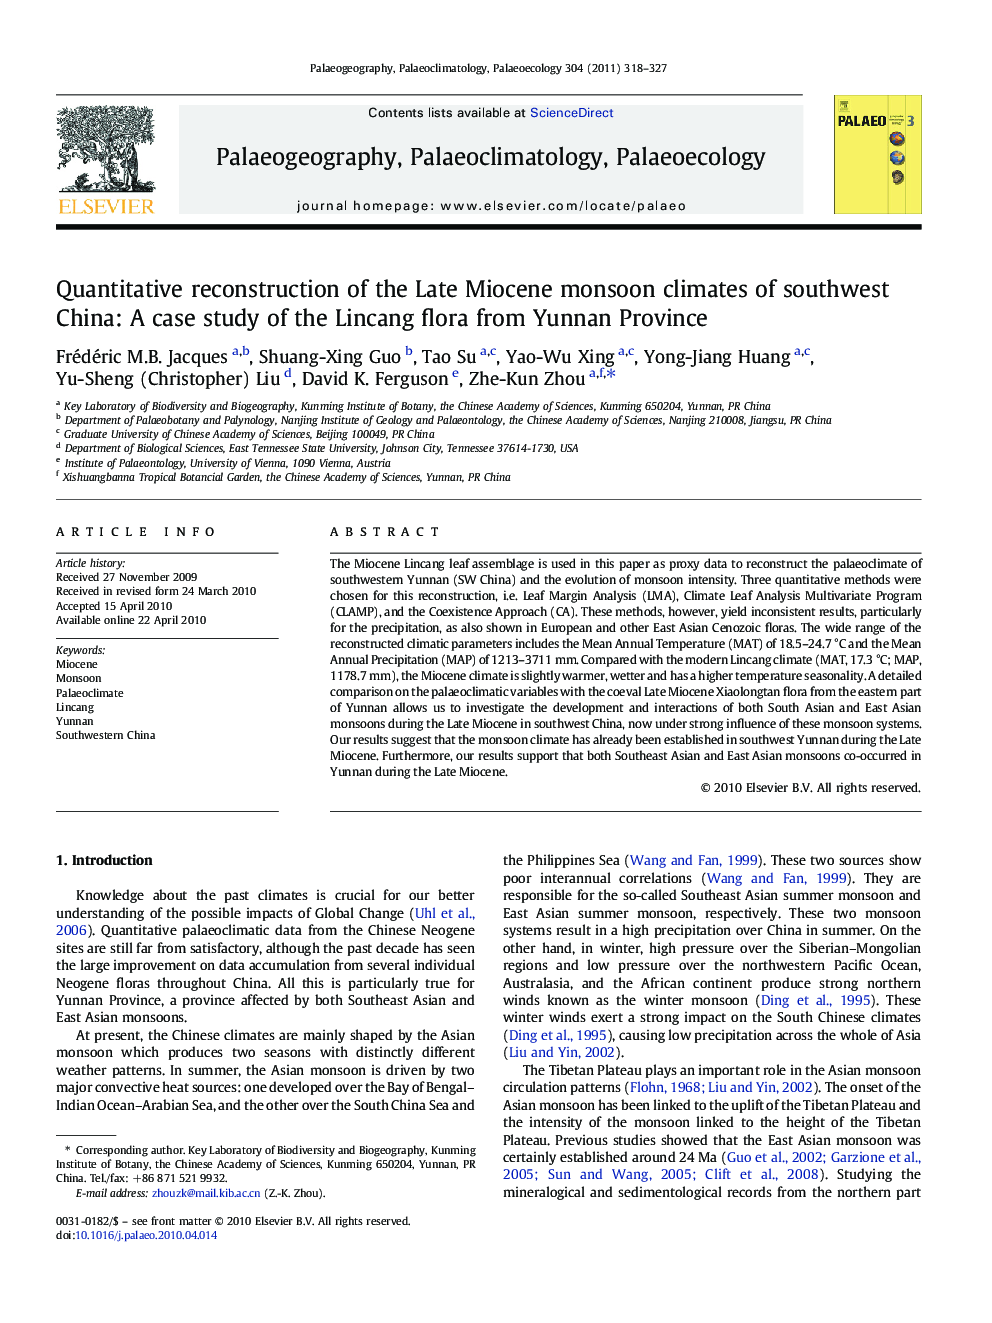 Quantitative reconstruction of the Late Miocene monsoon climates of southwest China: A case study of the Lincang flora from Yunnan Province